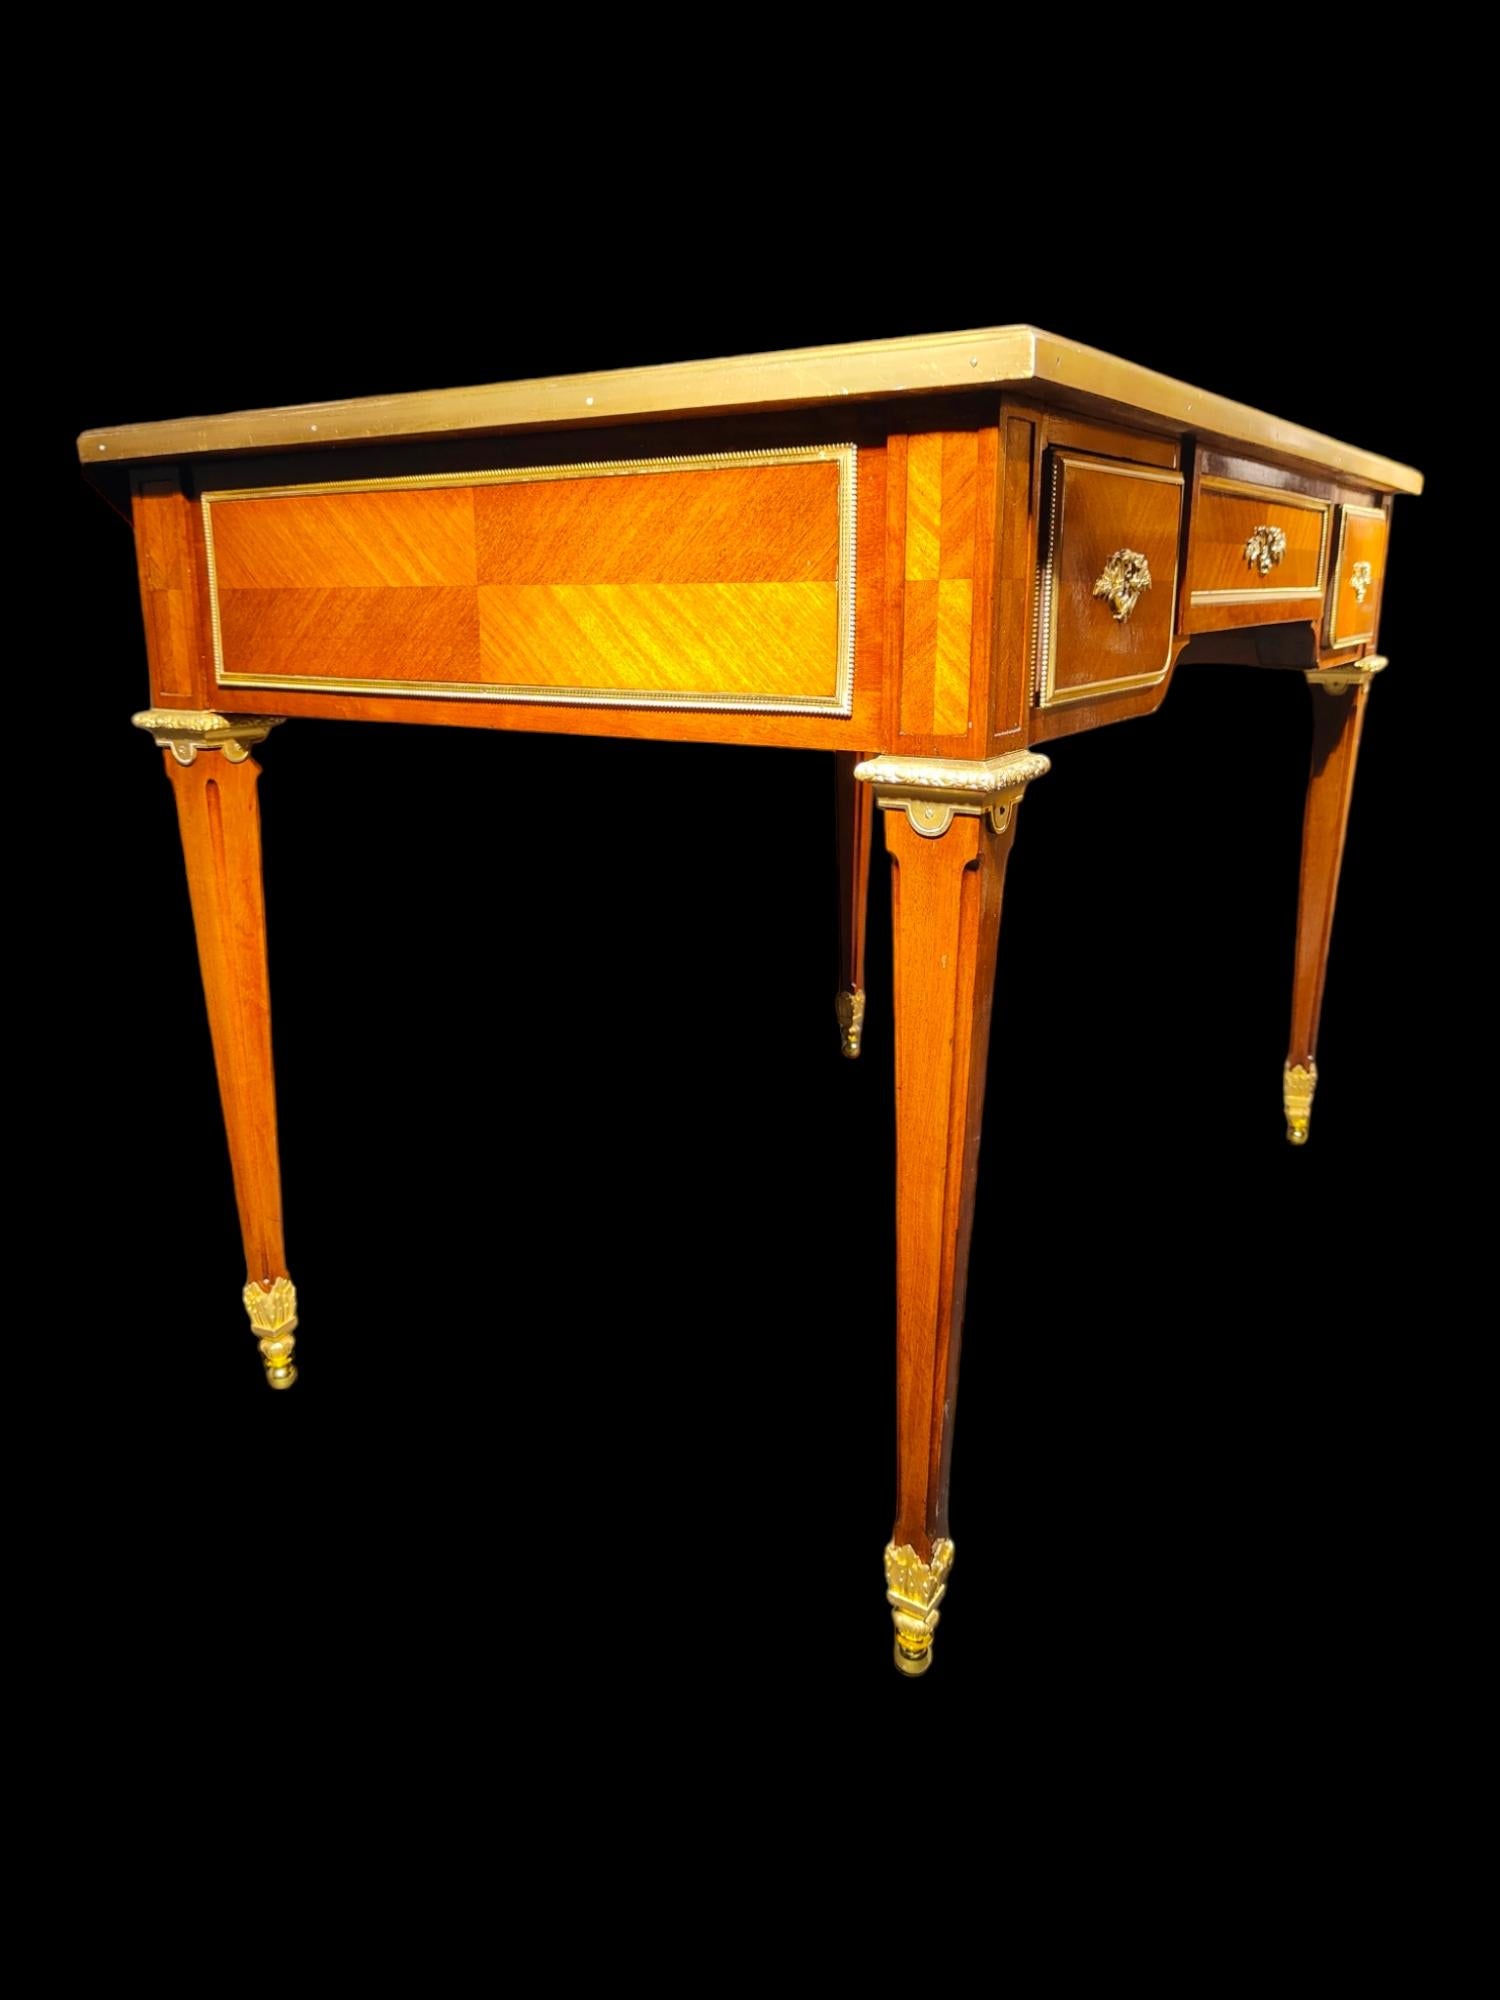 Very Fine Gilt Bronze Mounted Tulipwood and Amaranth Desk by L. Cueunieres For Sale 3